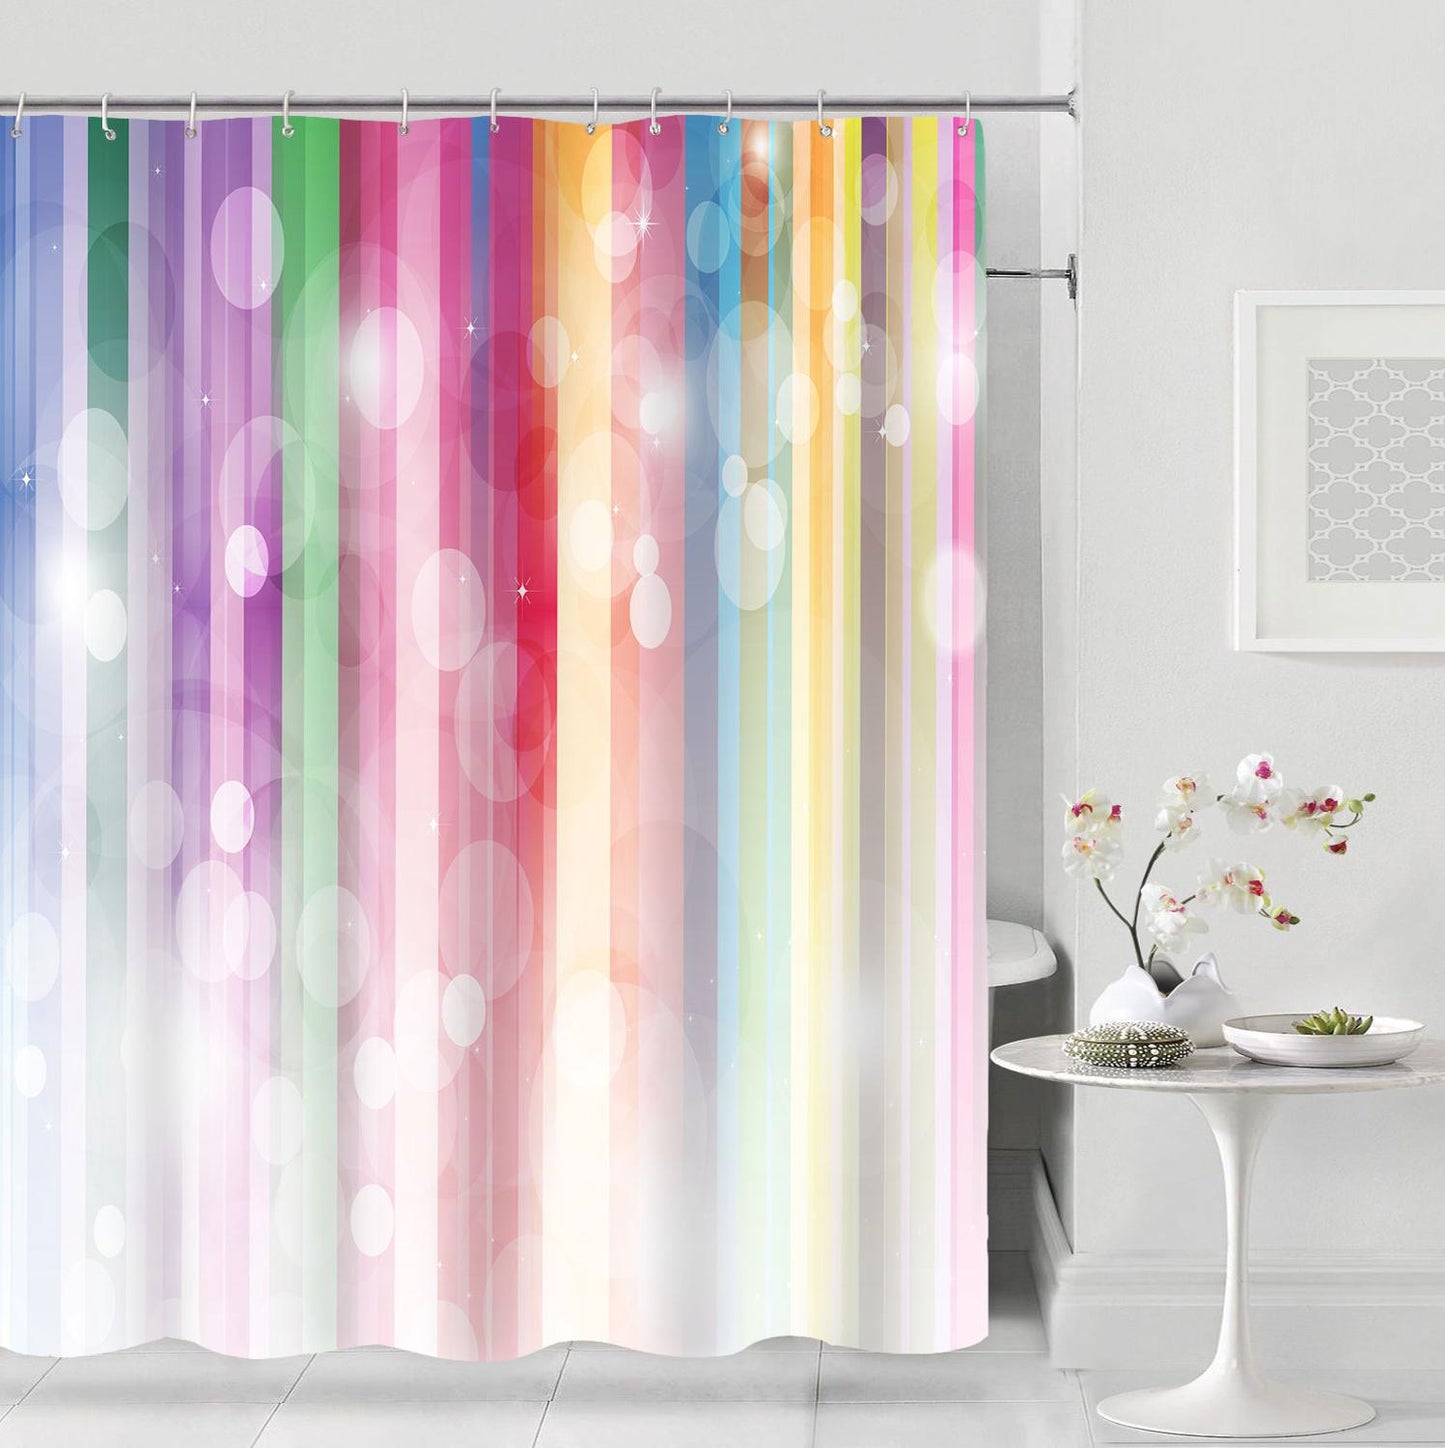 Modern shower curtain Fashion Shiny Shower Curtains Polyester Fabric Waterproof Bath Curtains Bathroom Partition curtain 12 hook